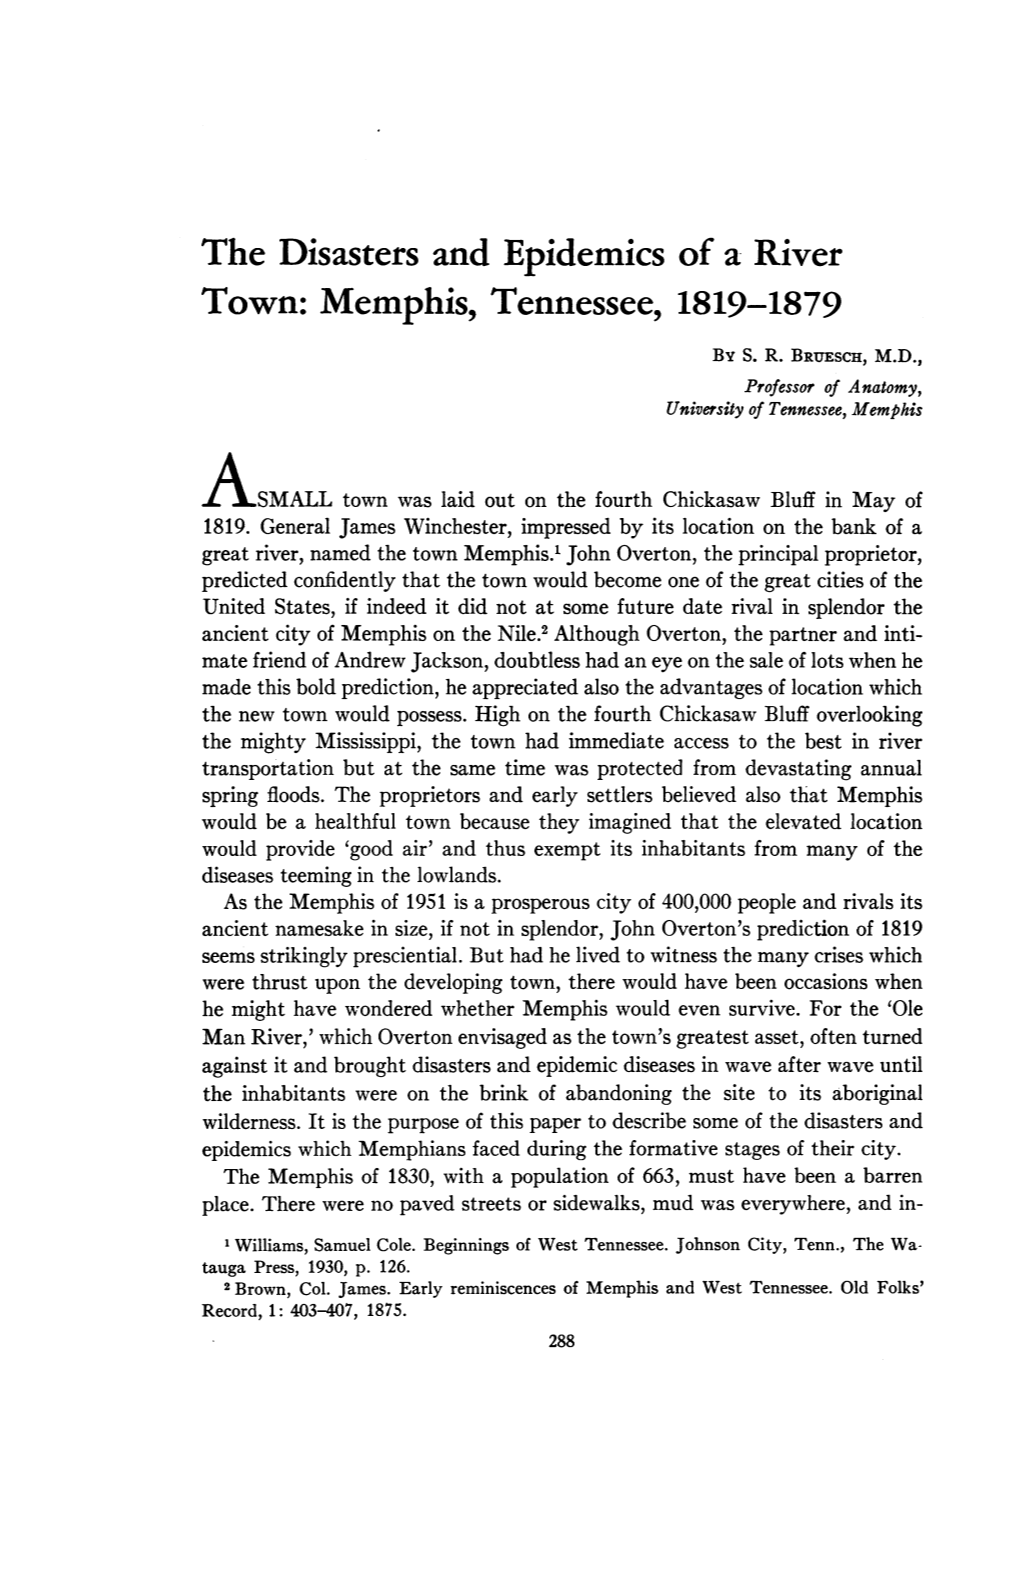 The Disasters and Epidemics of a River Town: Memphis, Tennessee, 1819-1879